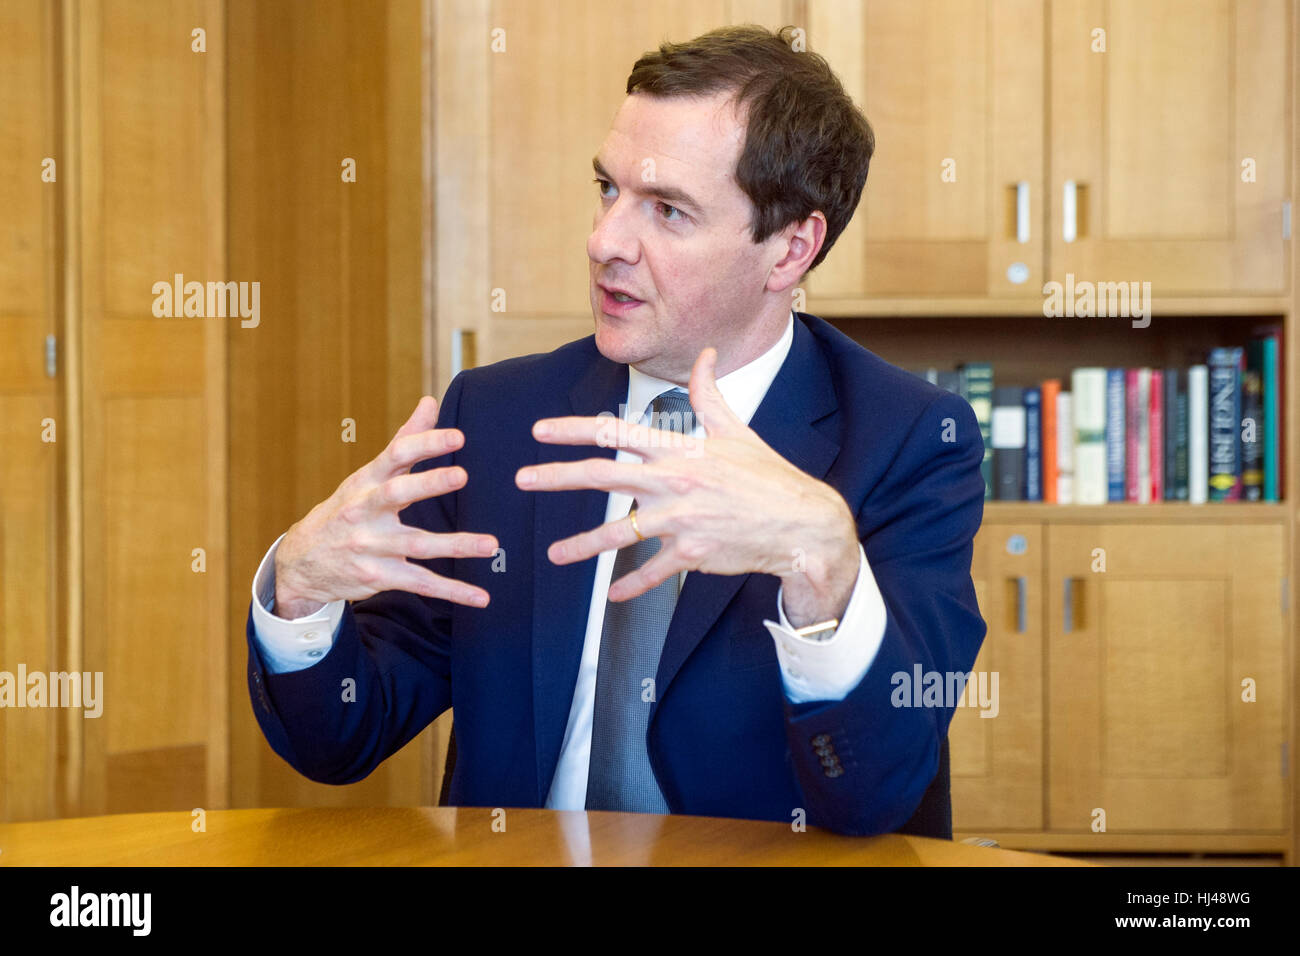 George Osborne, former Chancellor of the Exchequer and now economist for Blackrock Investments in his office. Stock Photo